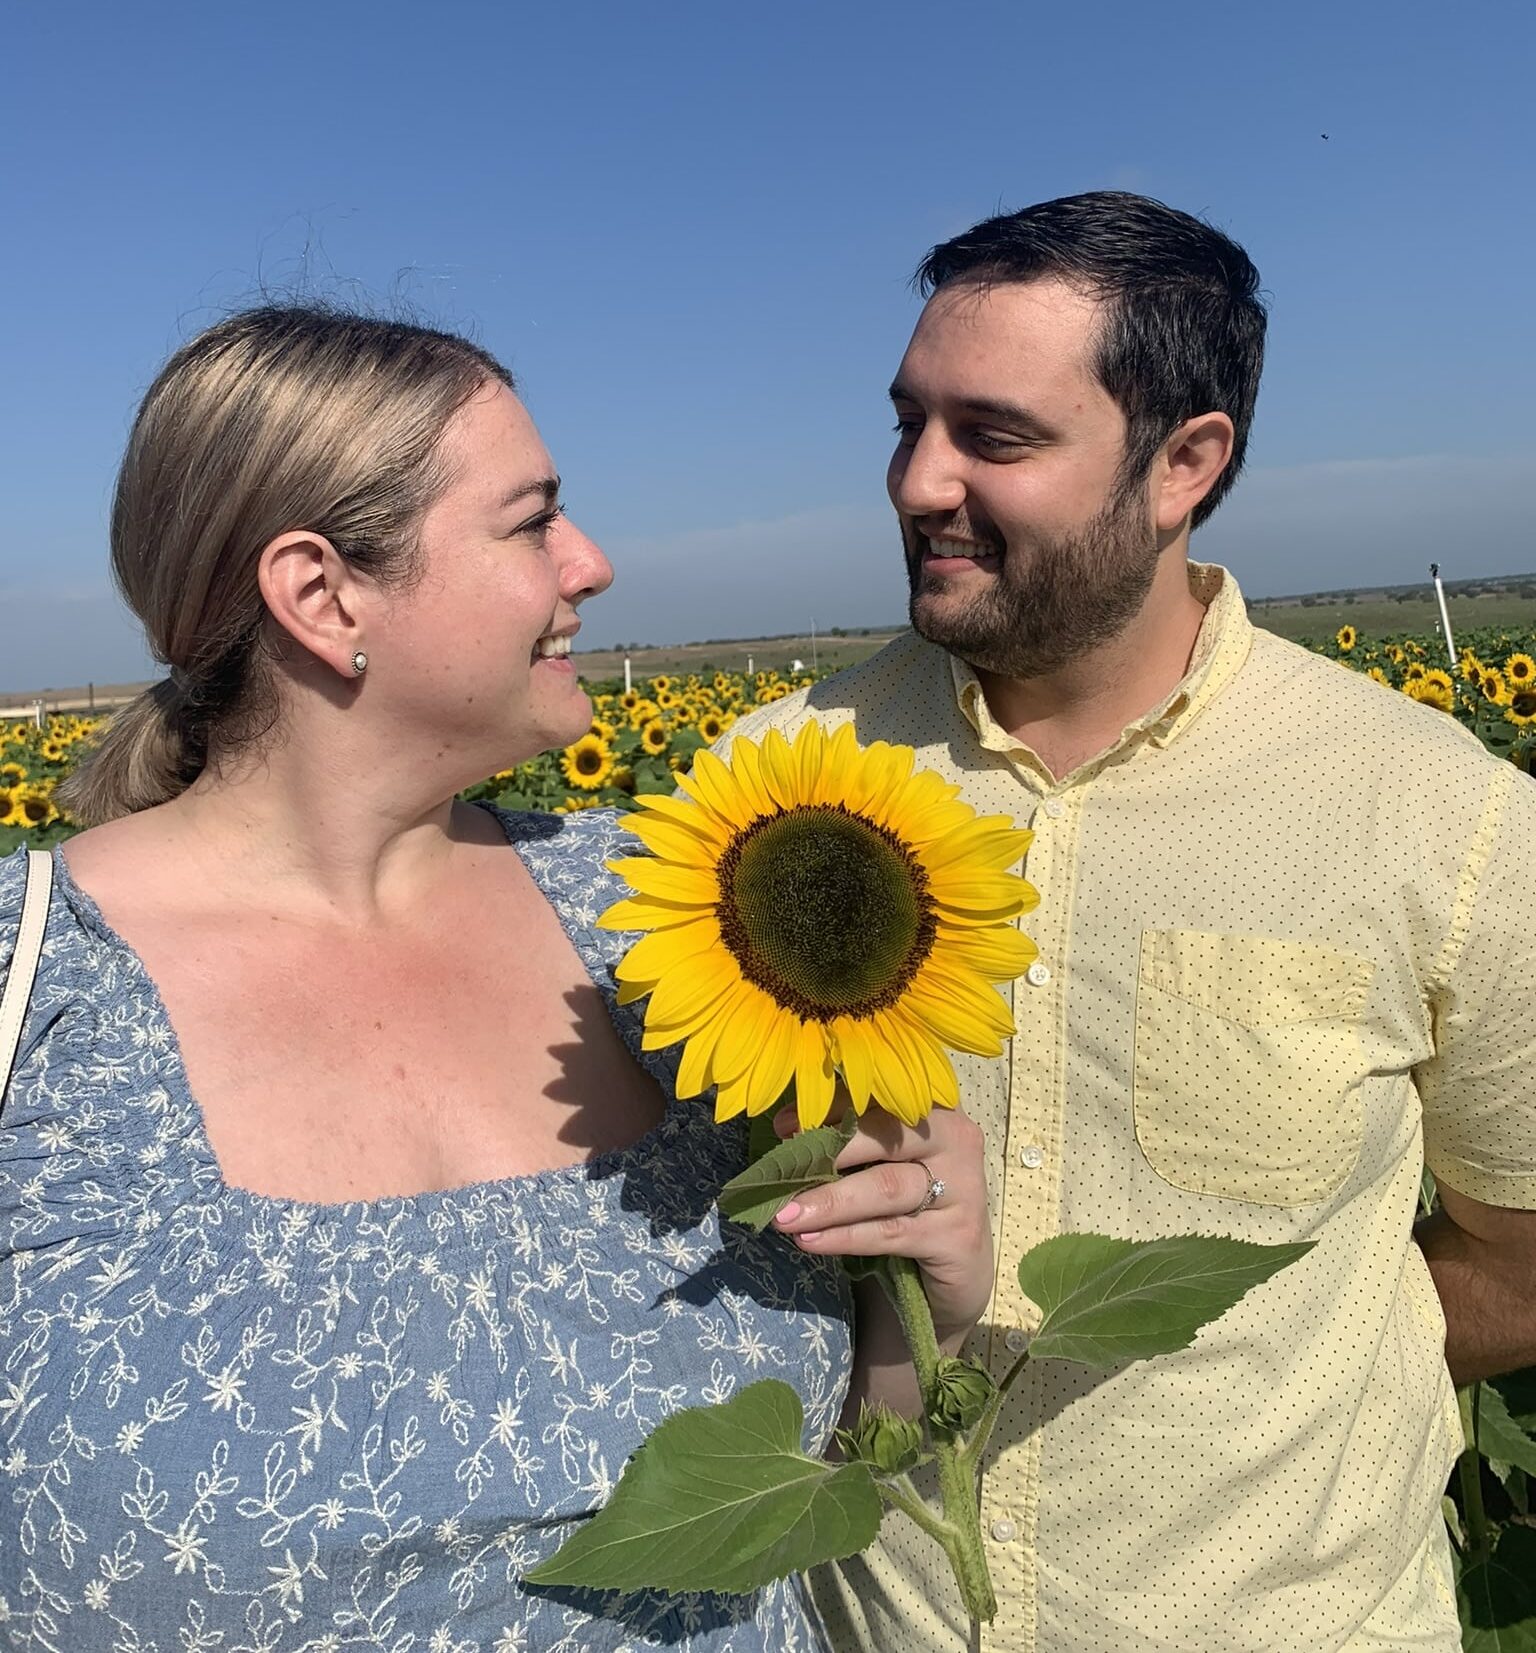 woman wearing blue top holds big sunflower as she looks to the right at man looking back smiles at her wearing yellow shirt with sunflower field in background